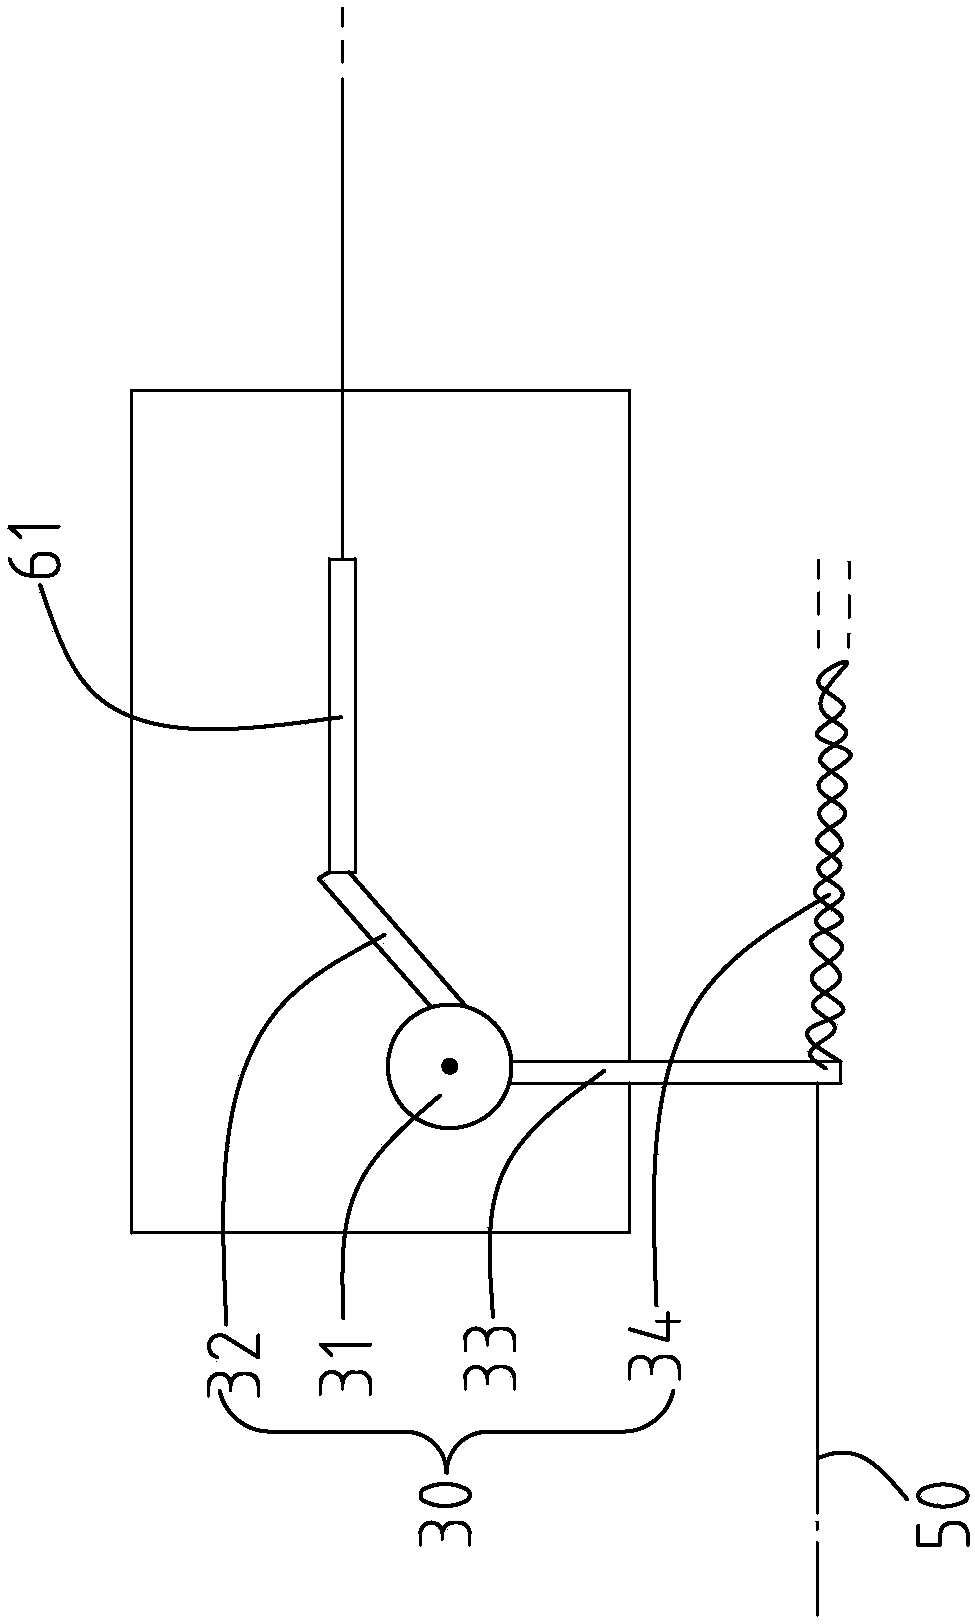 A control system for a spreading device